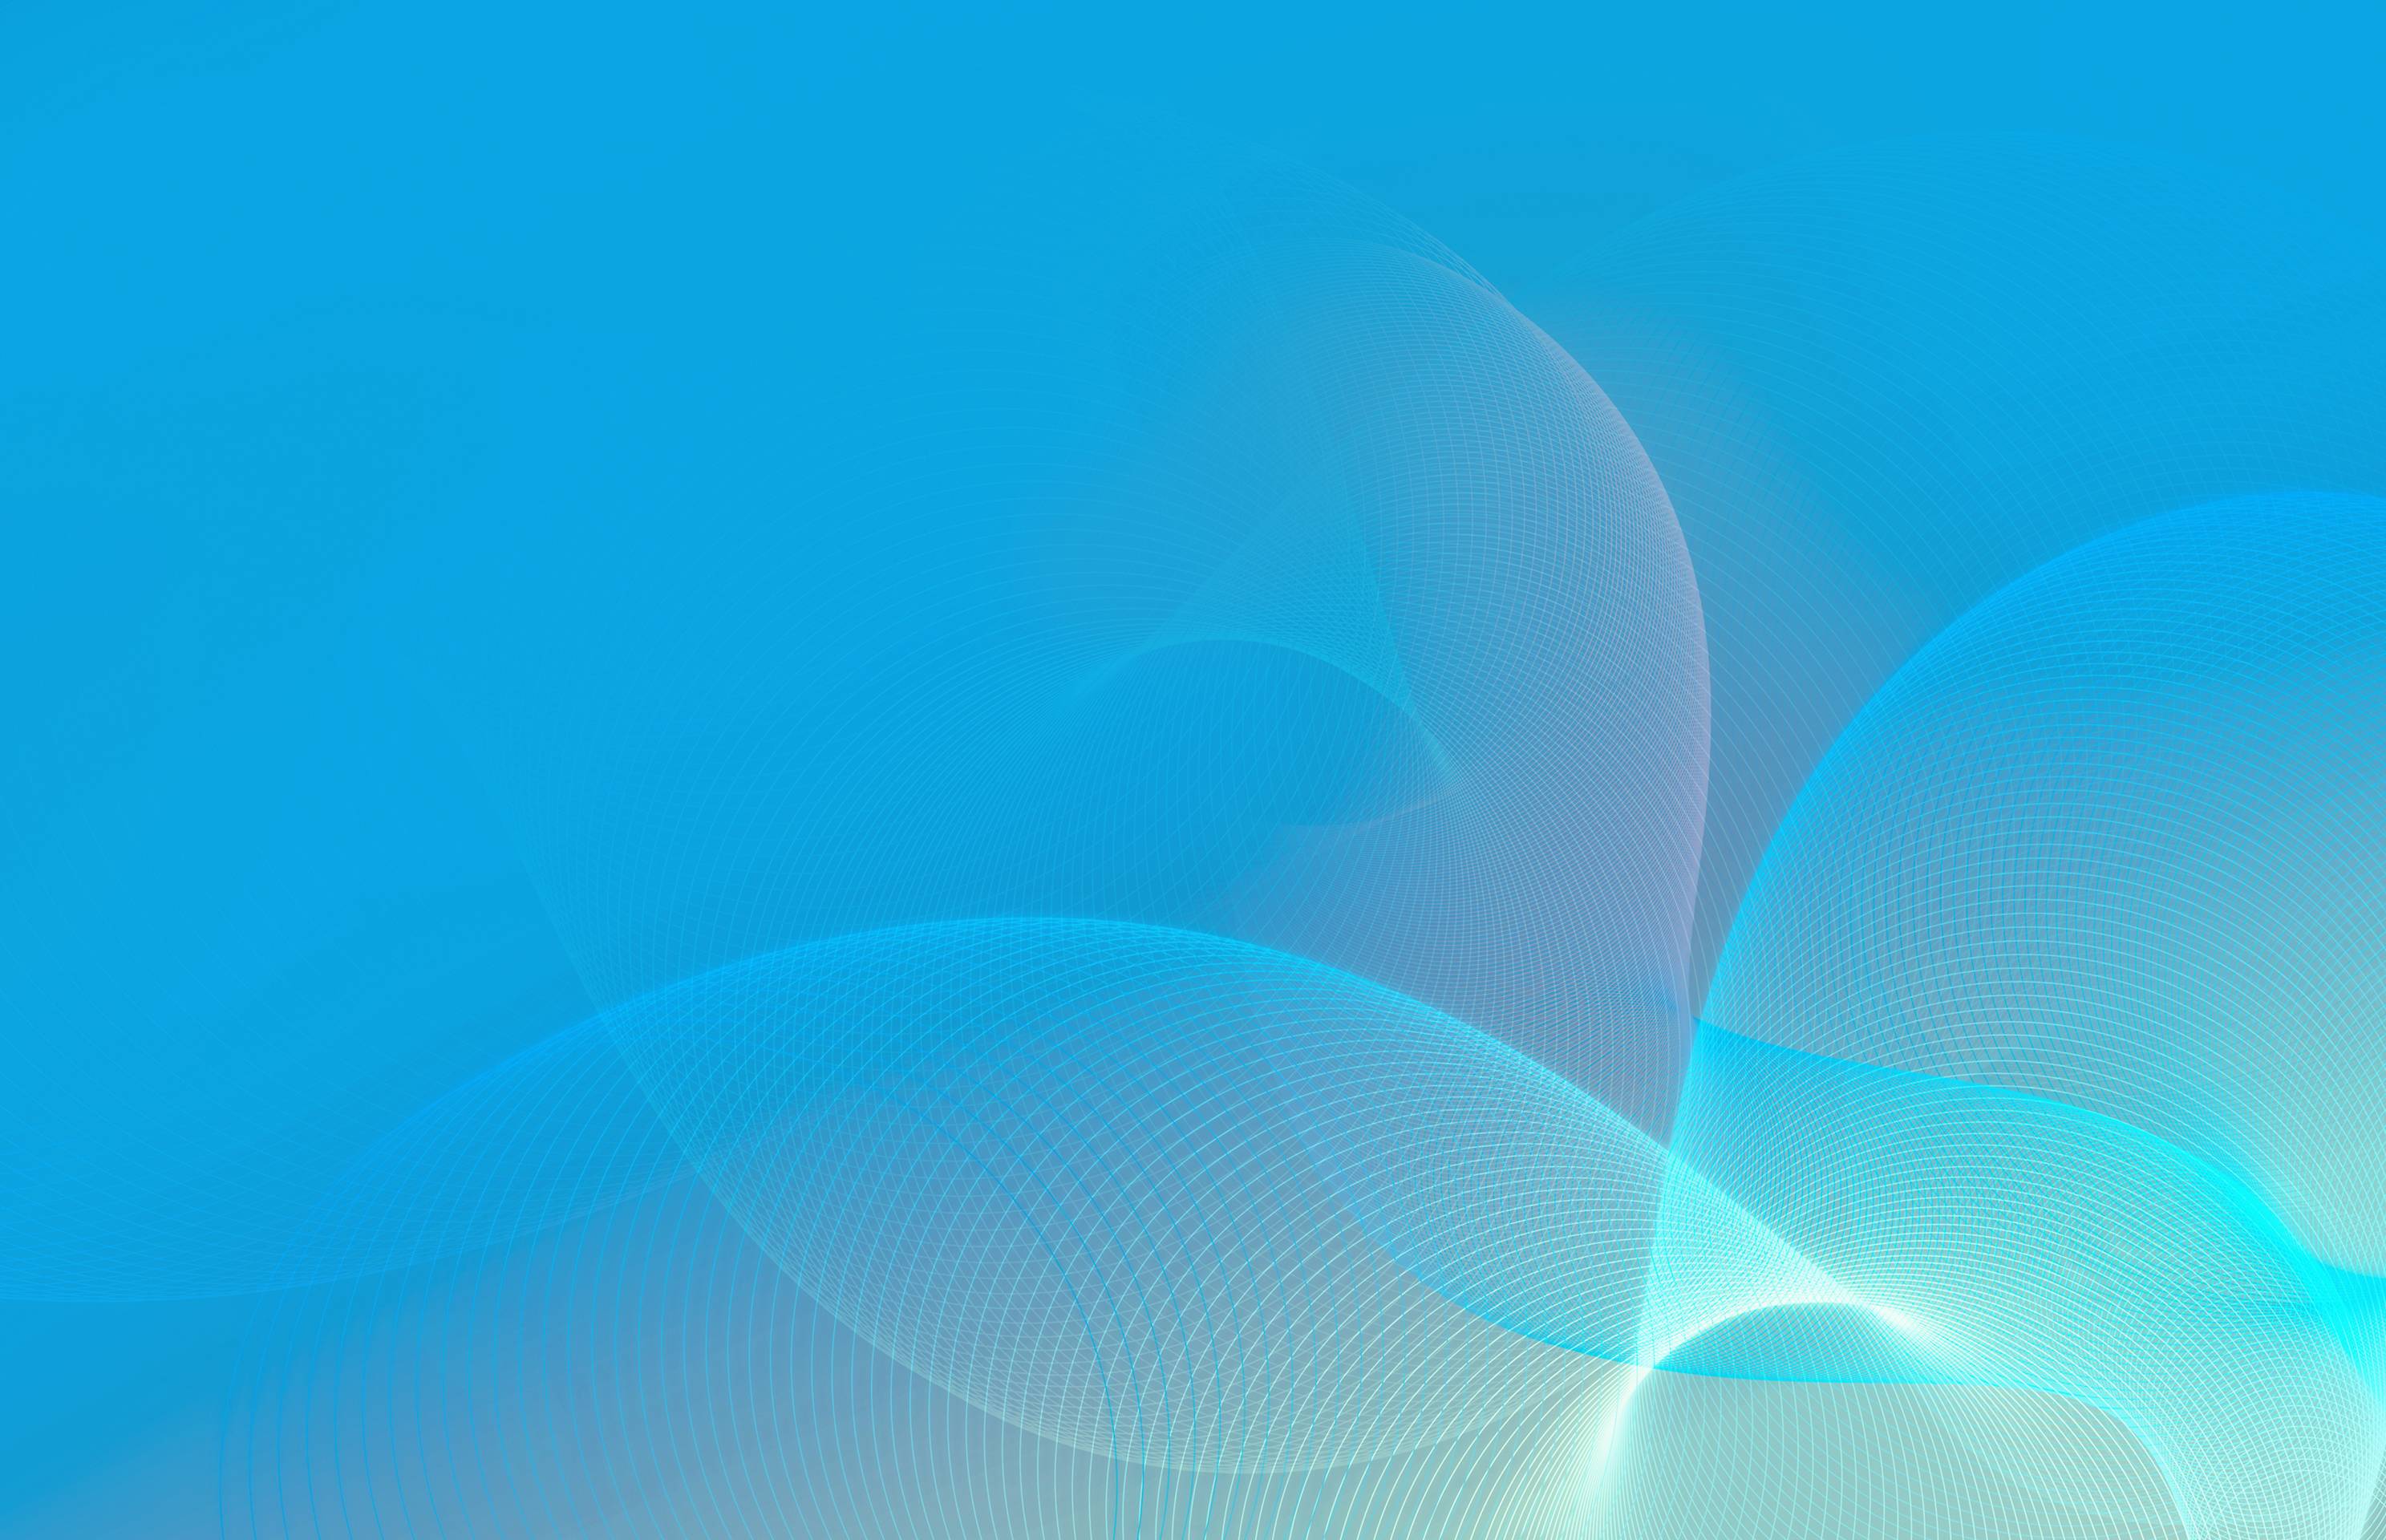 Download New Nexus 7 and Android 4.3 Wallpapers. HD AxeeTech